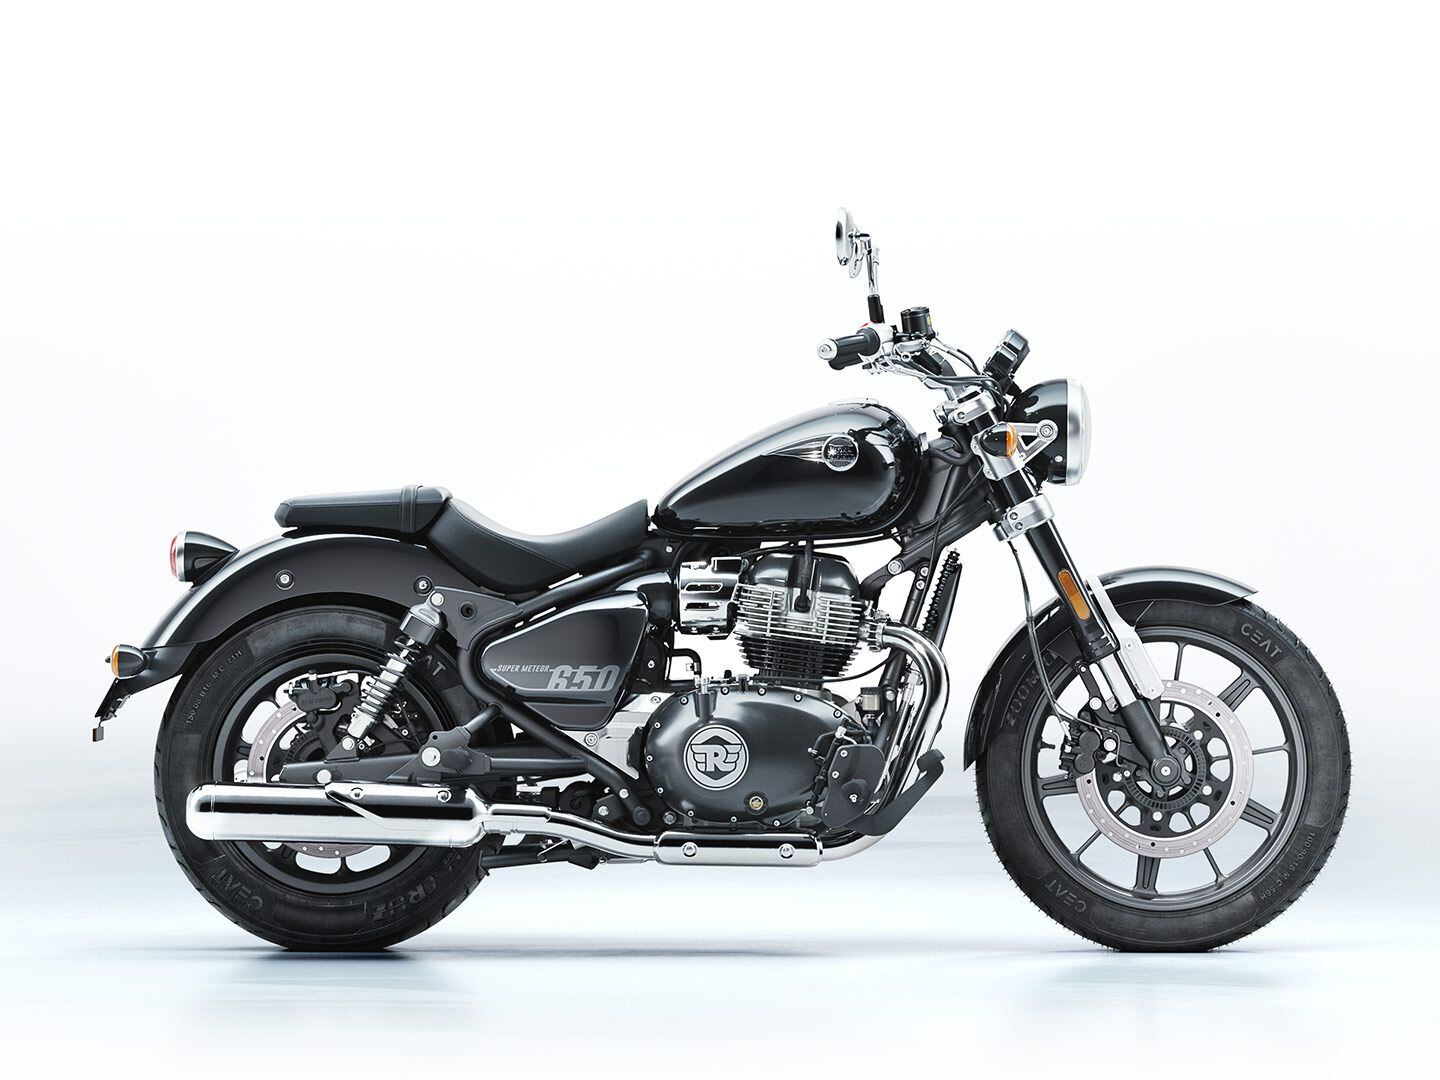 Royal Enfield's Super Meteor 650 utilizes the same 648cc parallel twin as the INT650 and Continental GT 650.